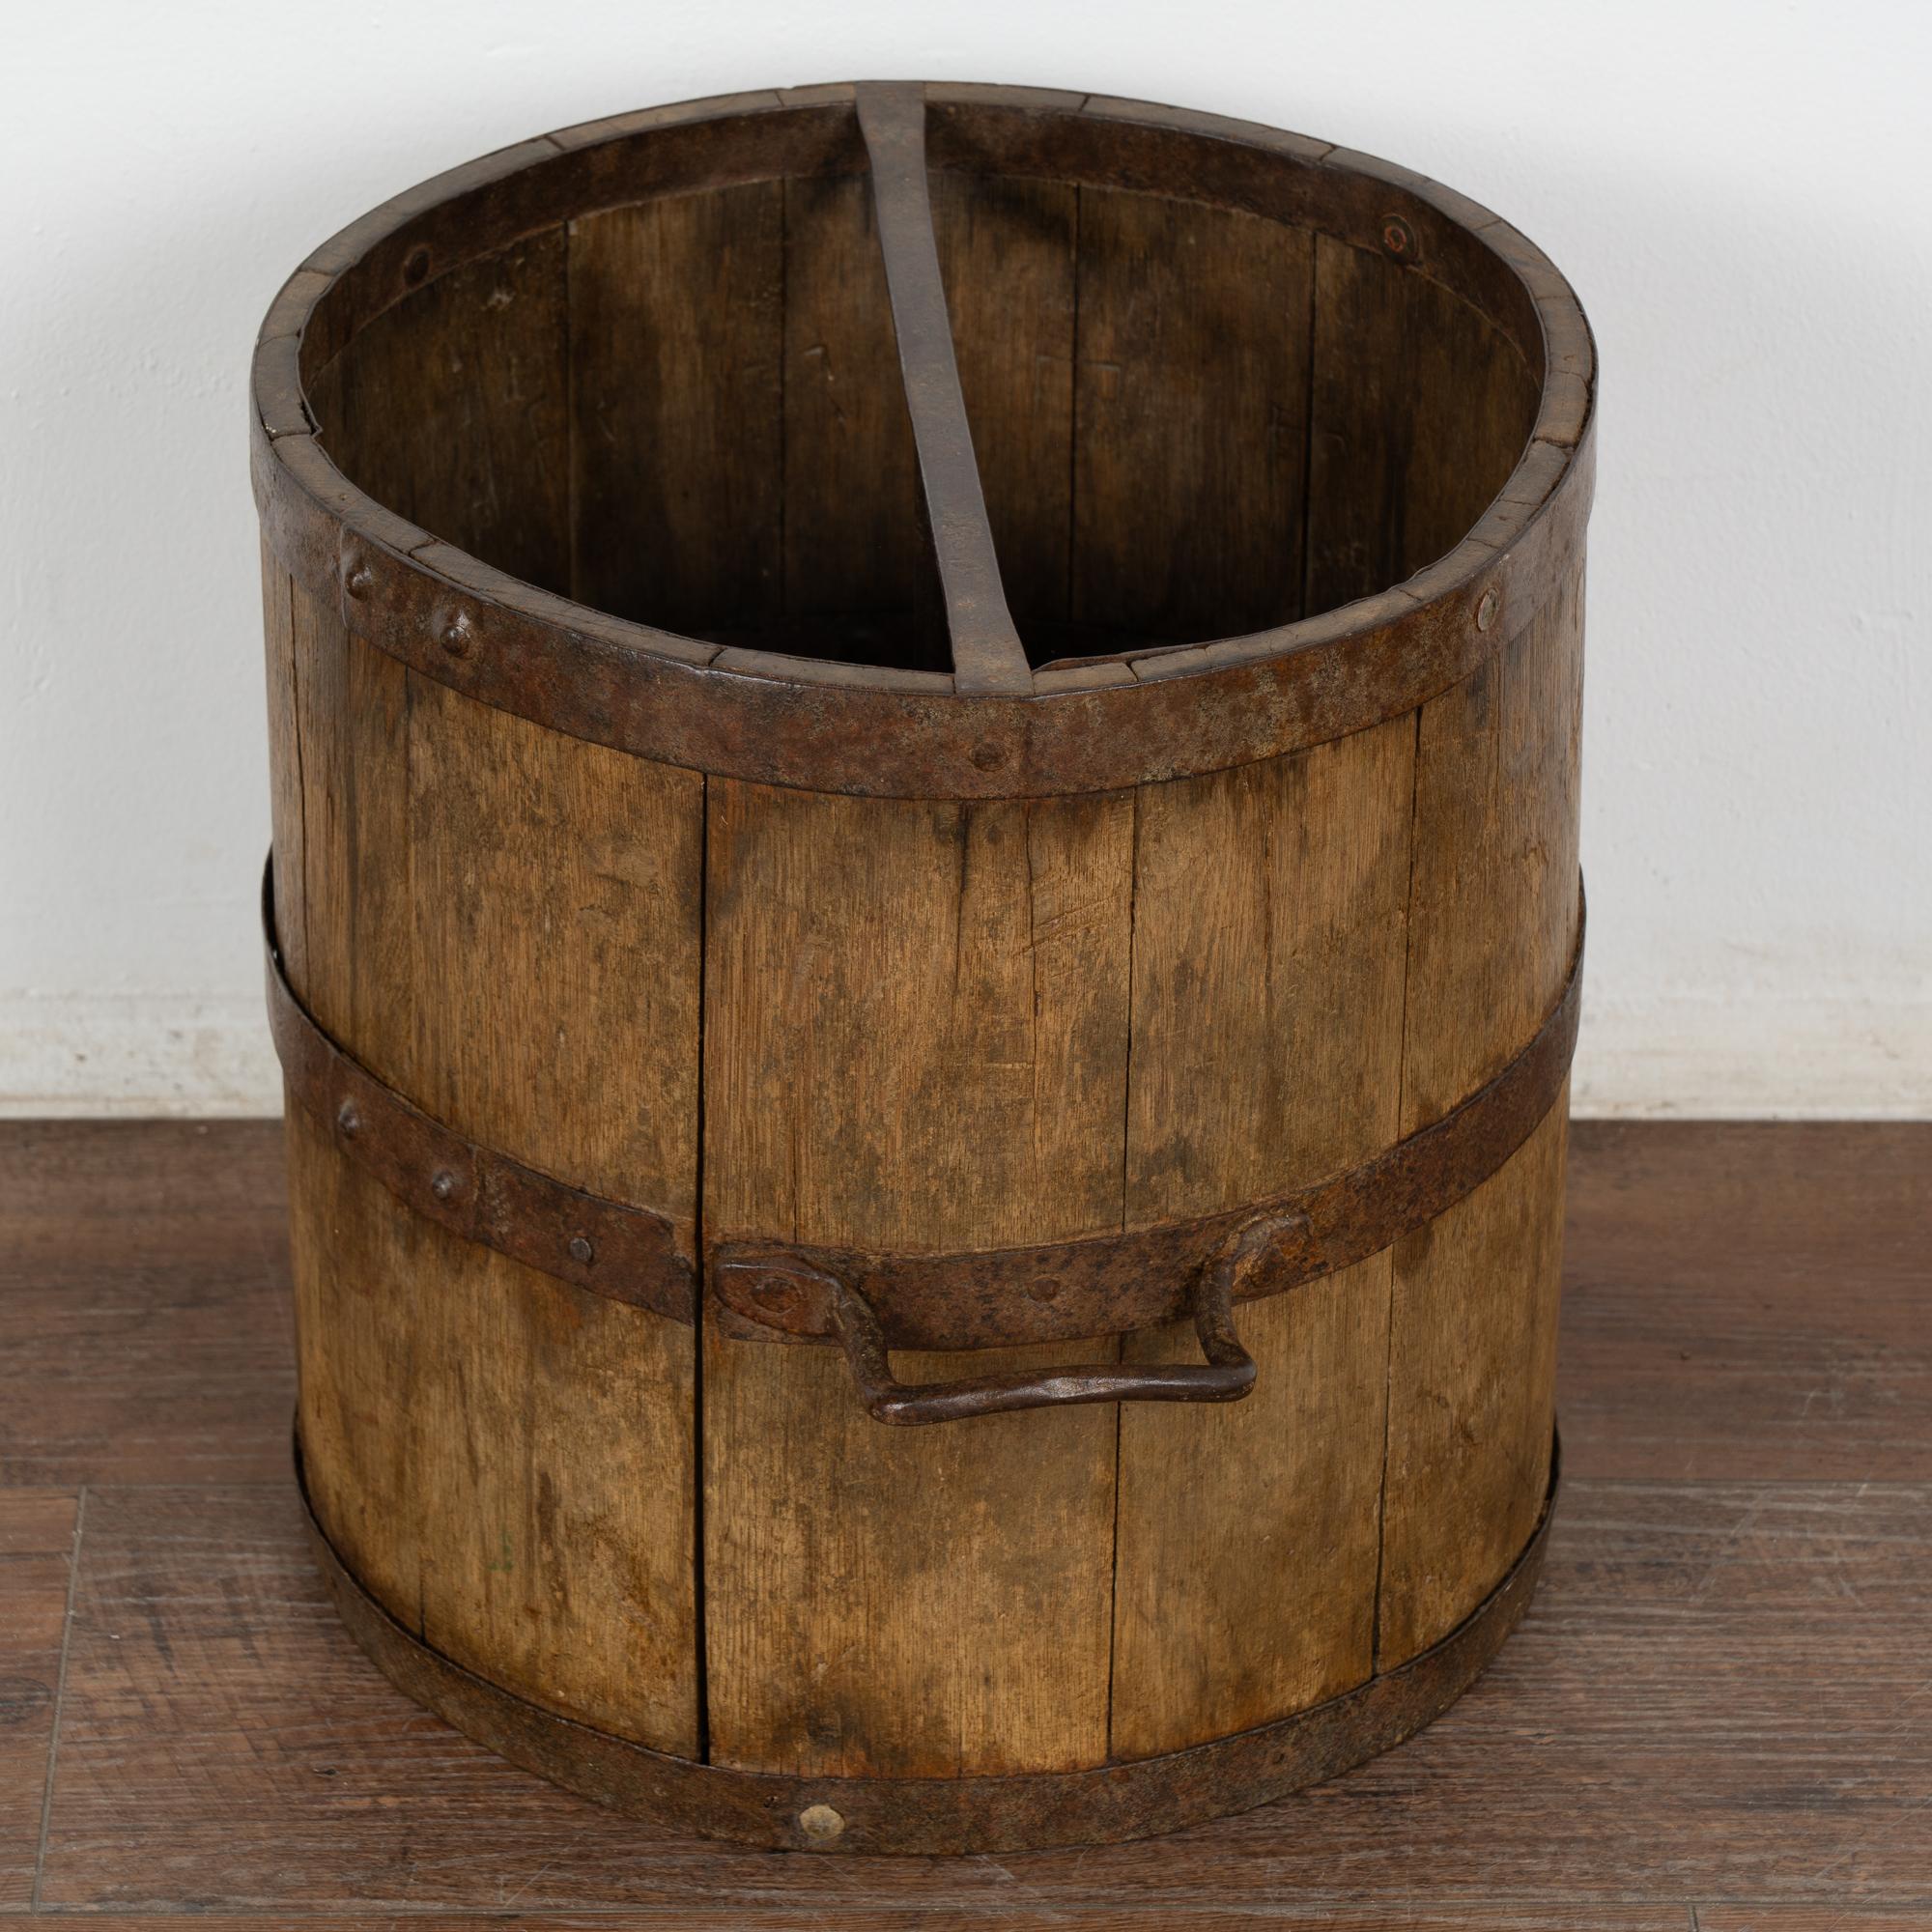 Country Oak Measuring Bucket with Metal Bands and Handles, Hungary circa 1920 For Sale